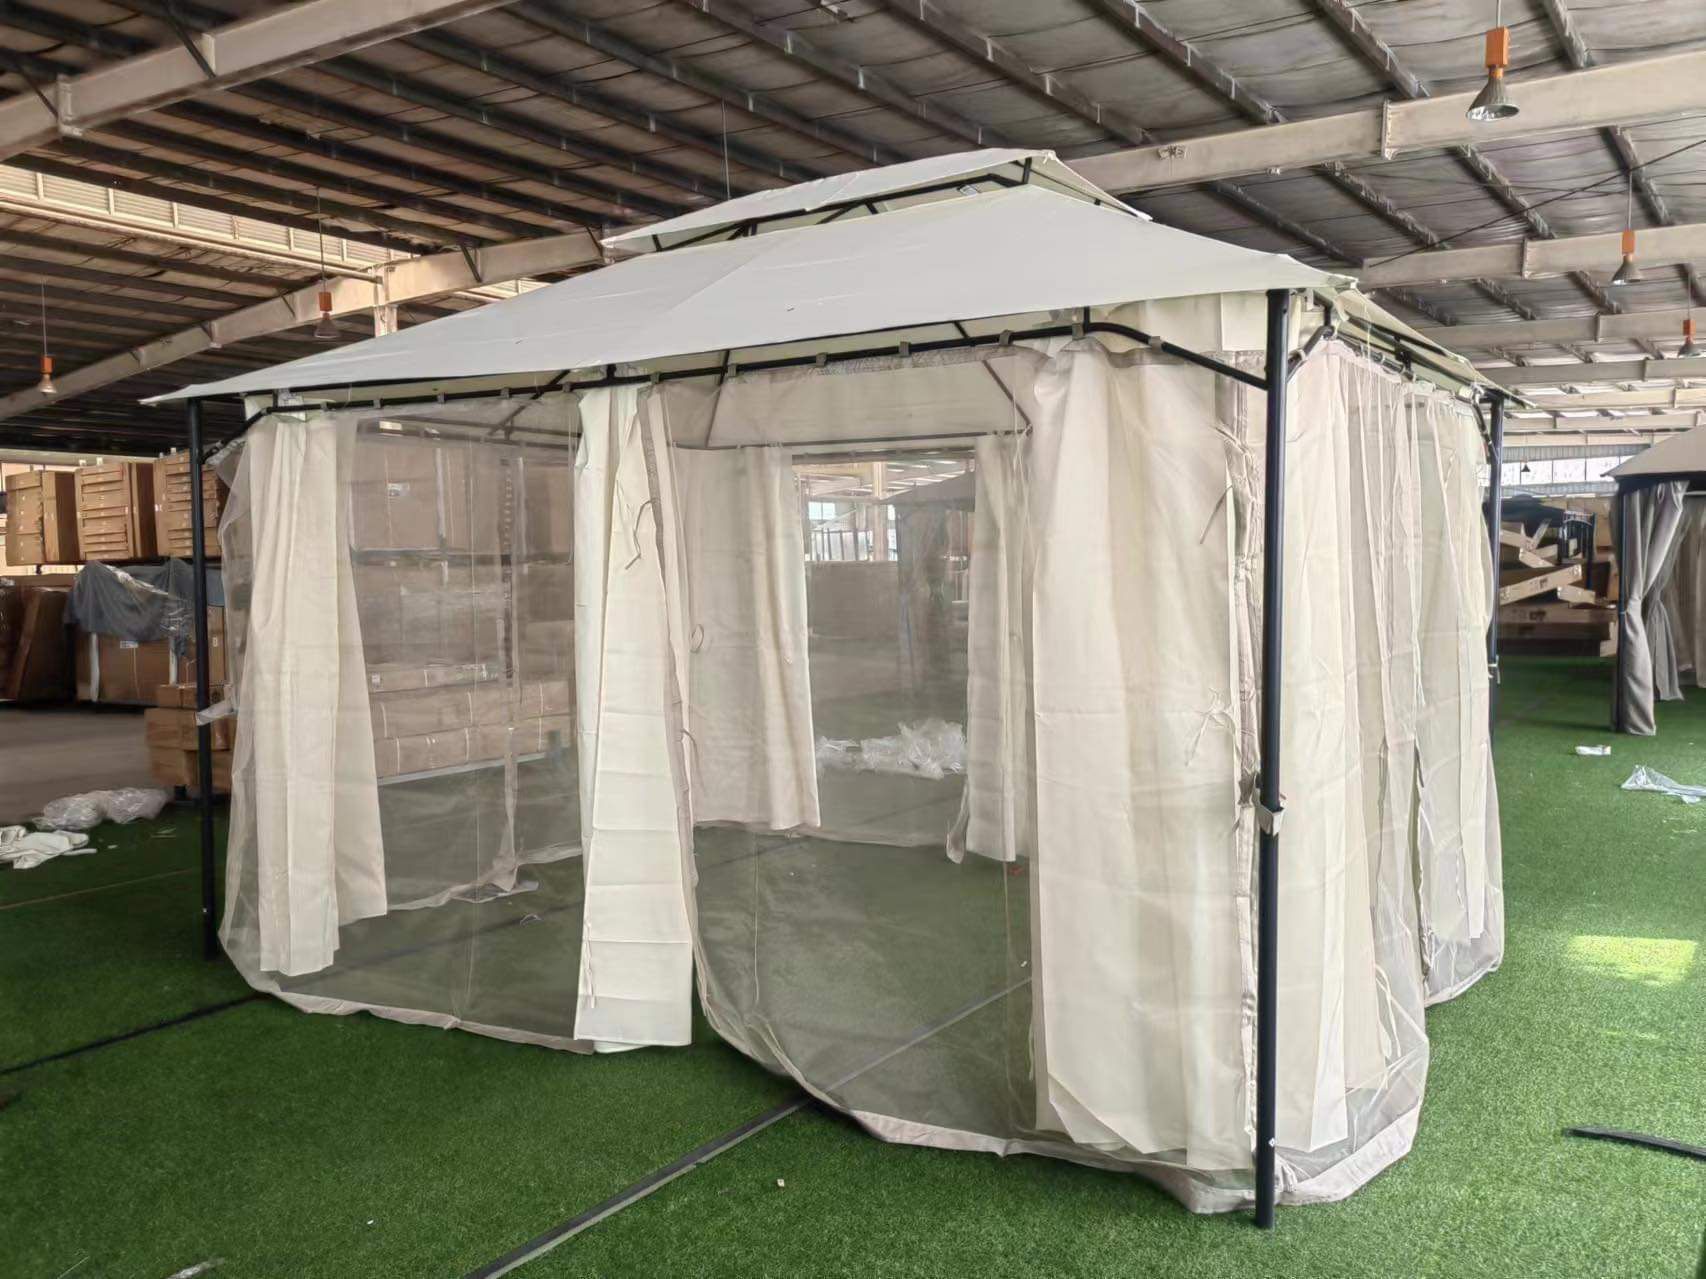 10' x 13' Outdoor Patio Gazebo with Curtains and Netting, 2-Tier Roof Pavilion Vented Canopy Tent, Steel